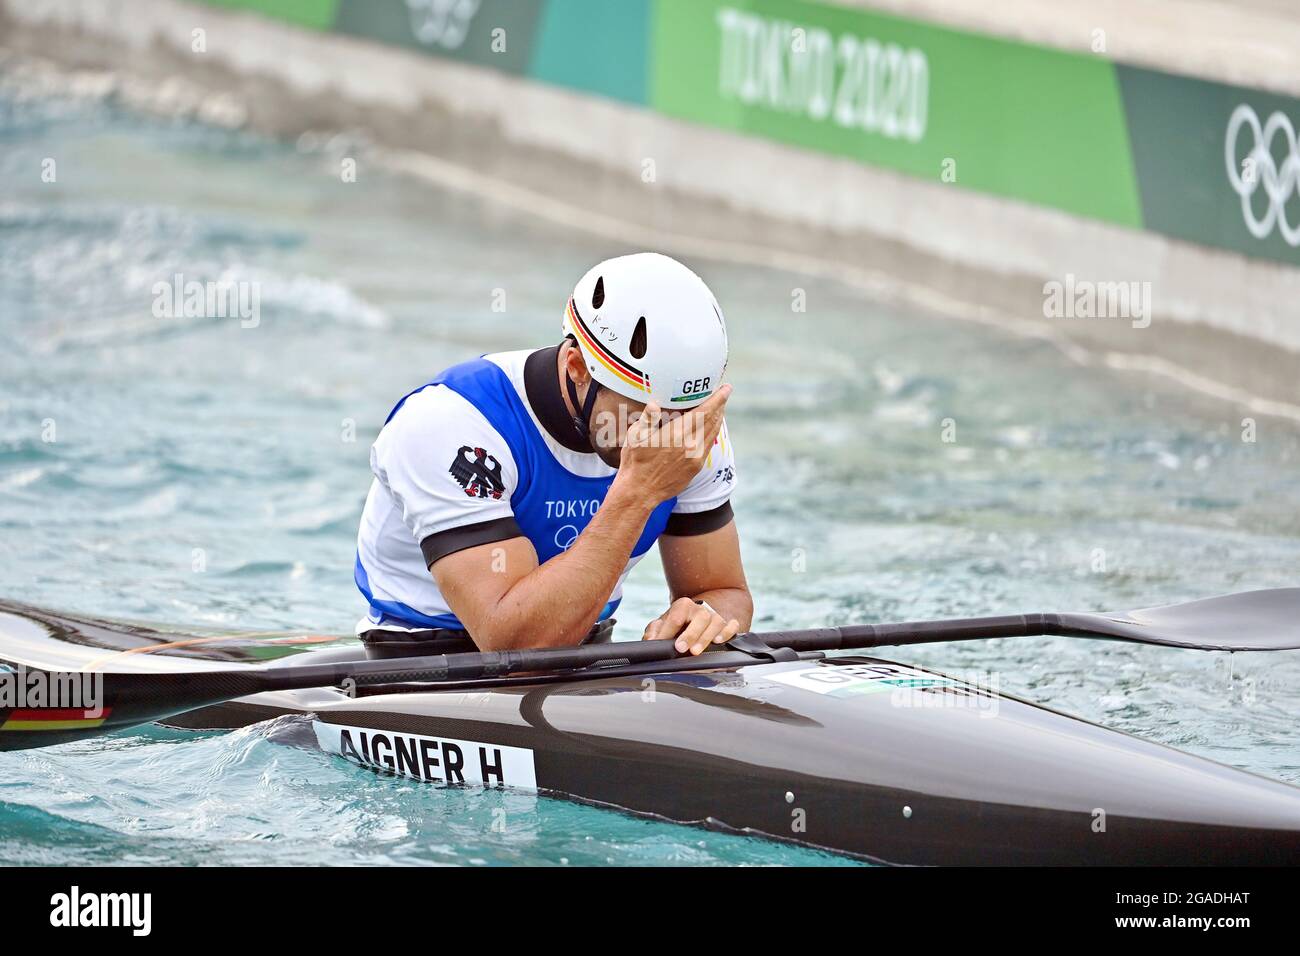 Tokyo, Japan. 30th July, 2021. Hannes AIGNER (GER), in the finish, action,  disappointment, frustrated, disappointed, frustratedriert, dejected, 3rd  place, Kajak Eine Maenner, Men`s Kayak, Men, Canoe Slalom, Canoe Slalom,  Whitewater on 07/30/2021,